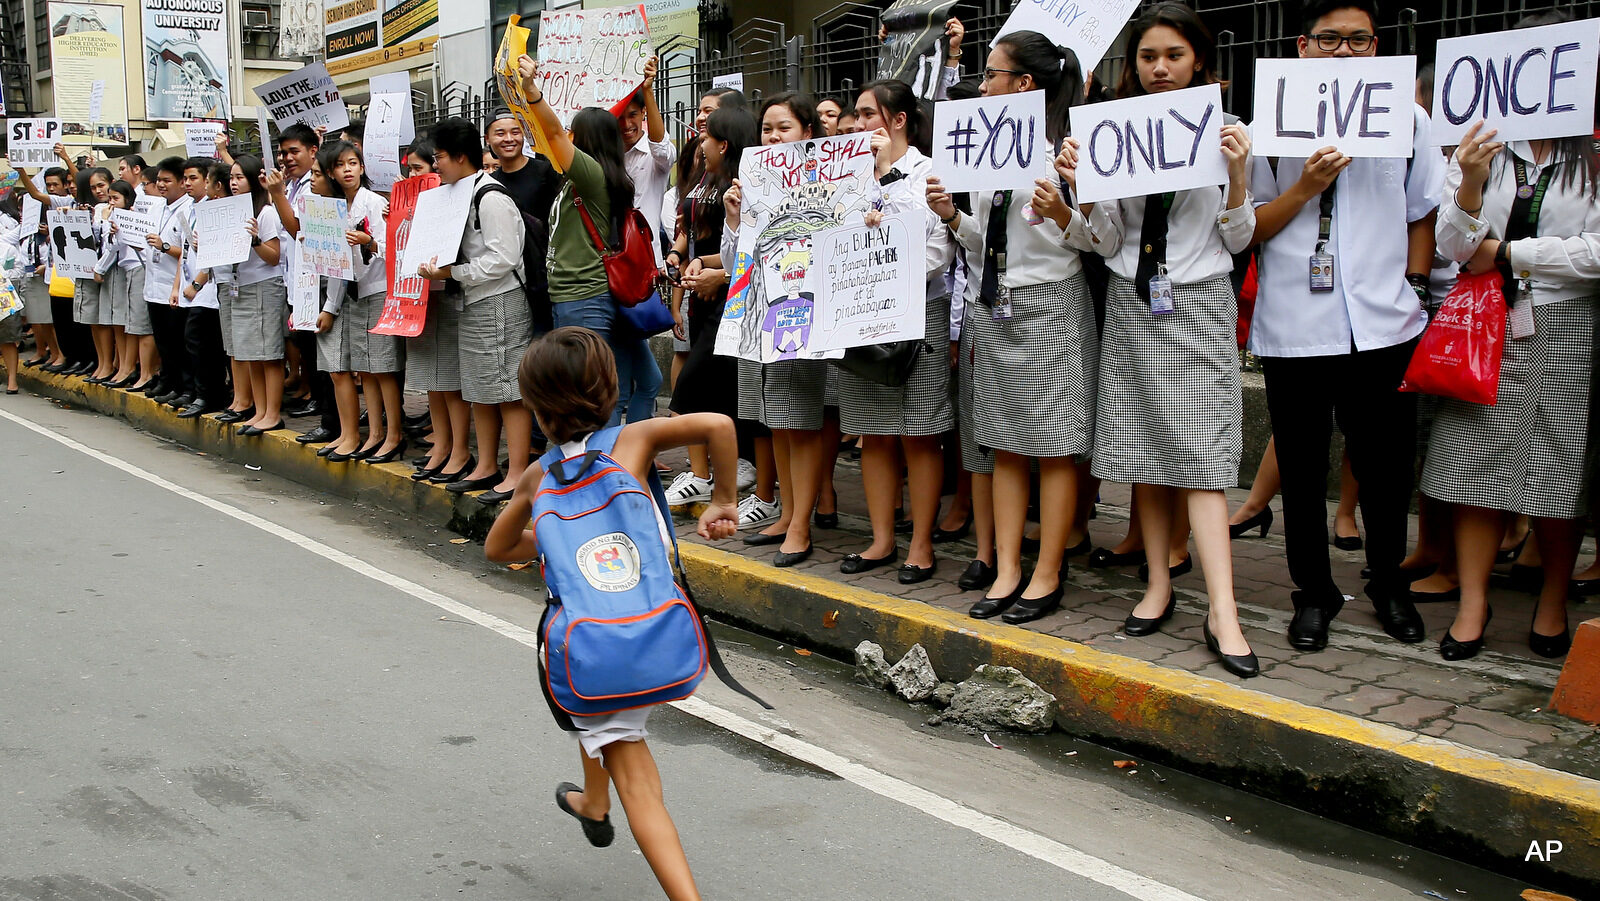 A school girl runs in front of students from St. Paul's University, a Roman Catholic school, as they come out from their campus to protest the killings being perpetrated in the unrelenting "War on Drugs" campaign of President Rodrigo Duterte, Friday, Sept. 30, 2016 in Manila, Philippines. Duterte raised the rhetoric over his bloody anti-crime war to a new level Friday, comparing it to Hitler and the Holocaust and saying he would be "happy to slaughter" 3 million addicts. Duterte issued his latest threat against drug dealers and users early Friday on returning to his hometown in southern Davao city after visiting Vietnam, where he discussed his anti-drug campaign with Vietnamese leaders and compared notes on battling the problem.